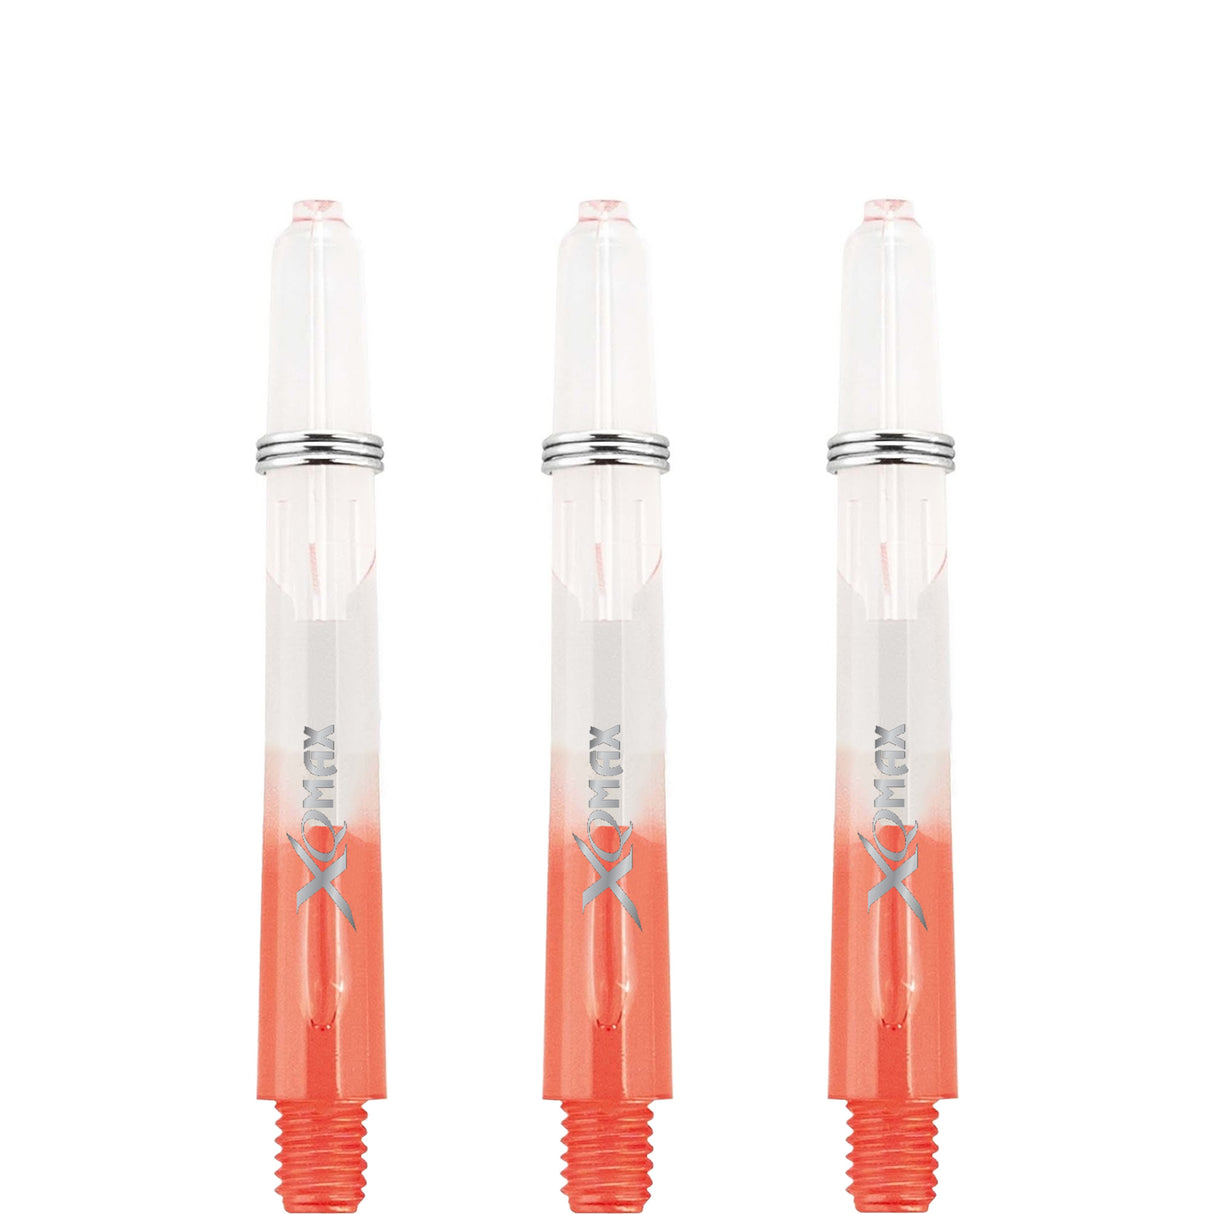 XQMax Gradient Polycarbonate Dart Shafts - with Logo - includes Springs - Transparent & Red